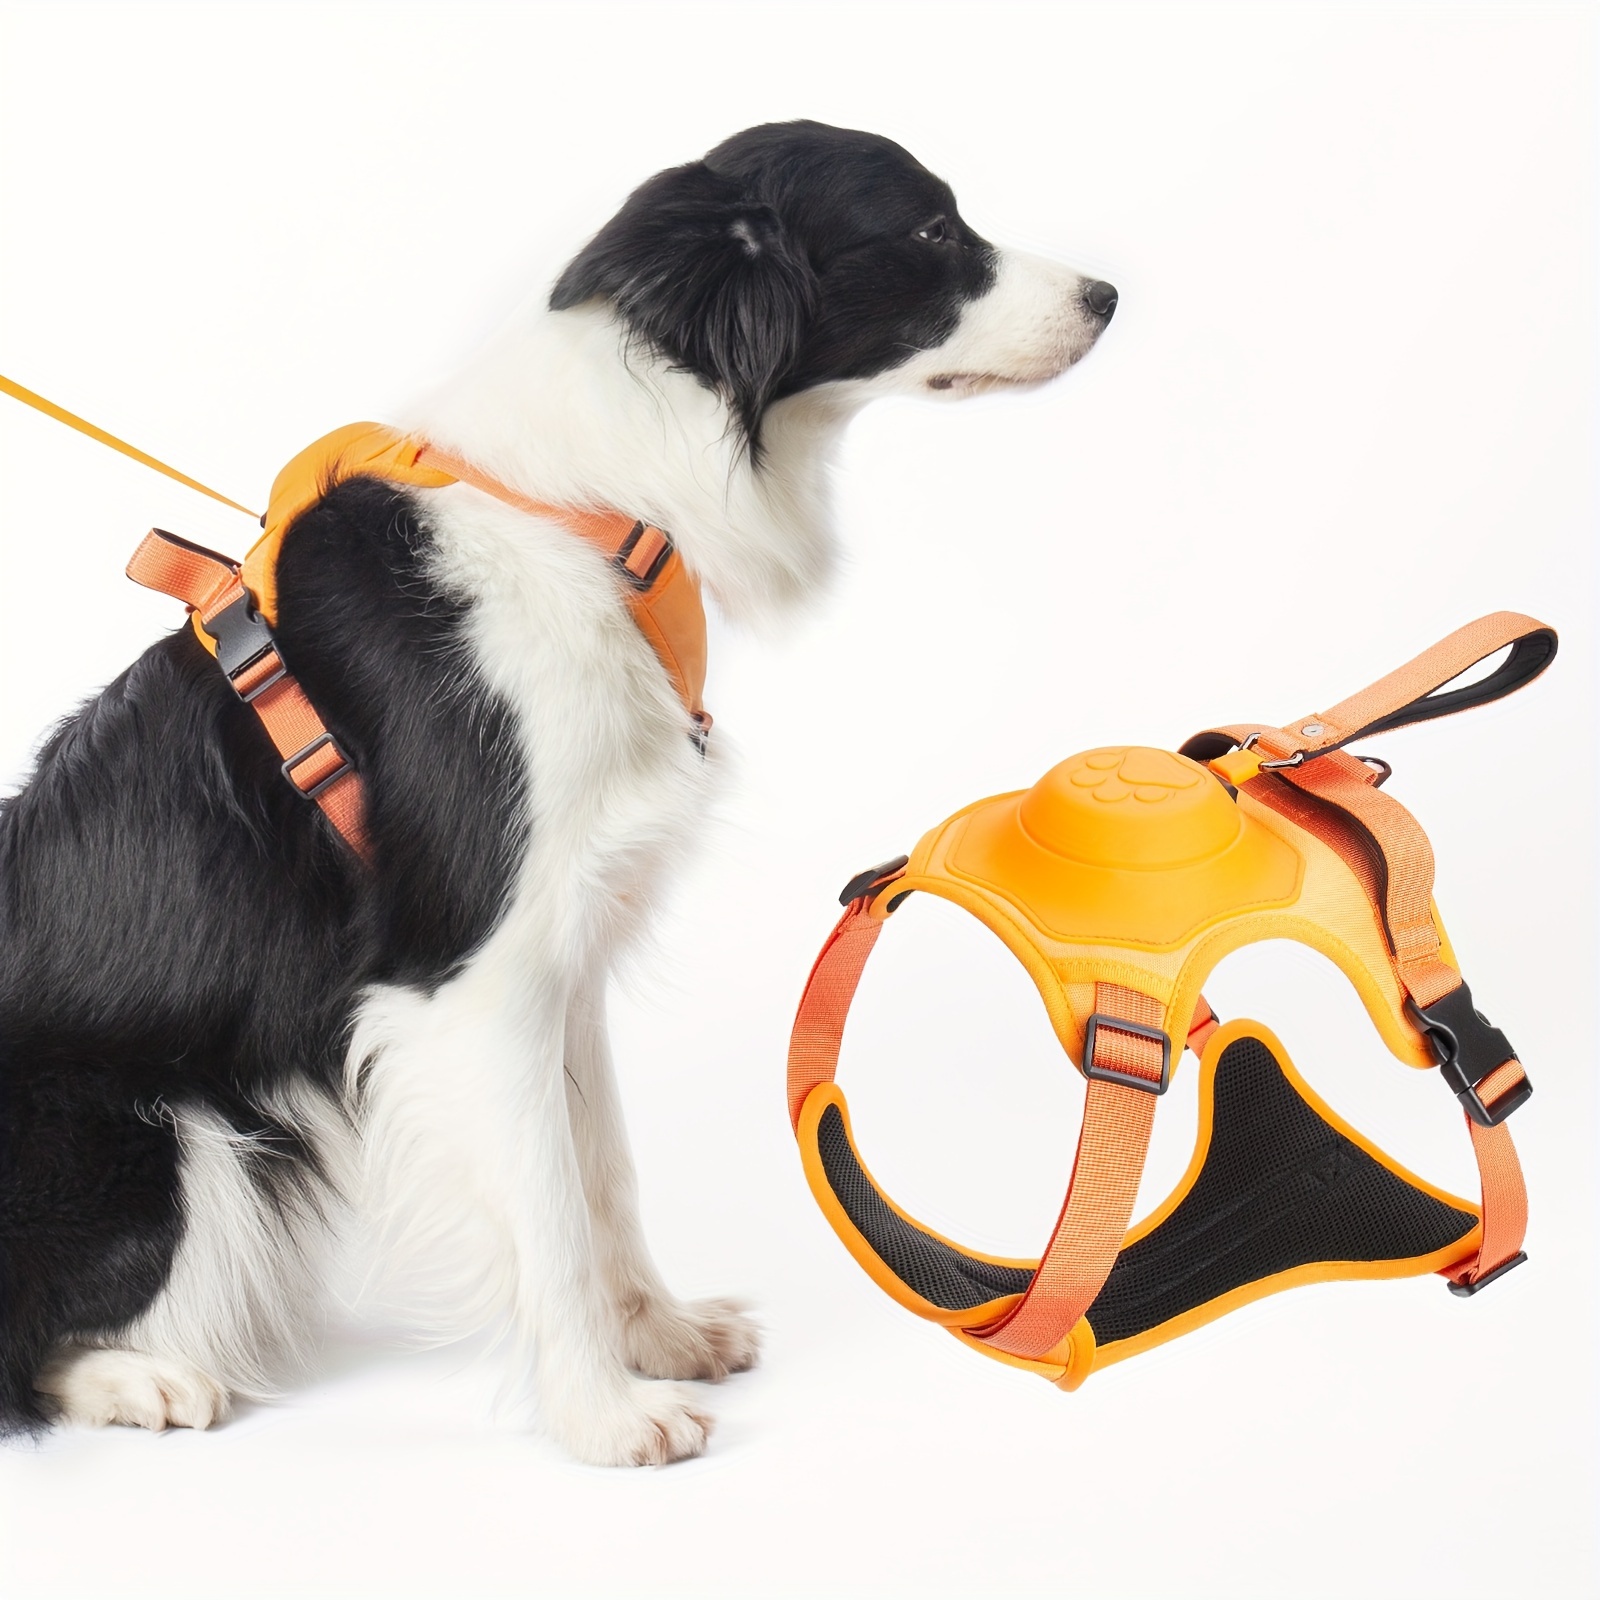 

Dog Harness And Built-in Retractable Leash, Explosion-proof Vest-style Dog Harness With Automatic Telescopic Rope For Medium And Large Dogs